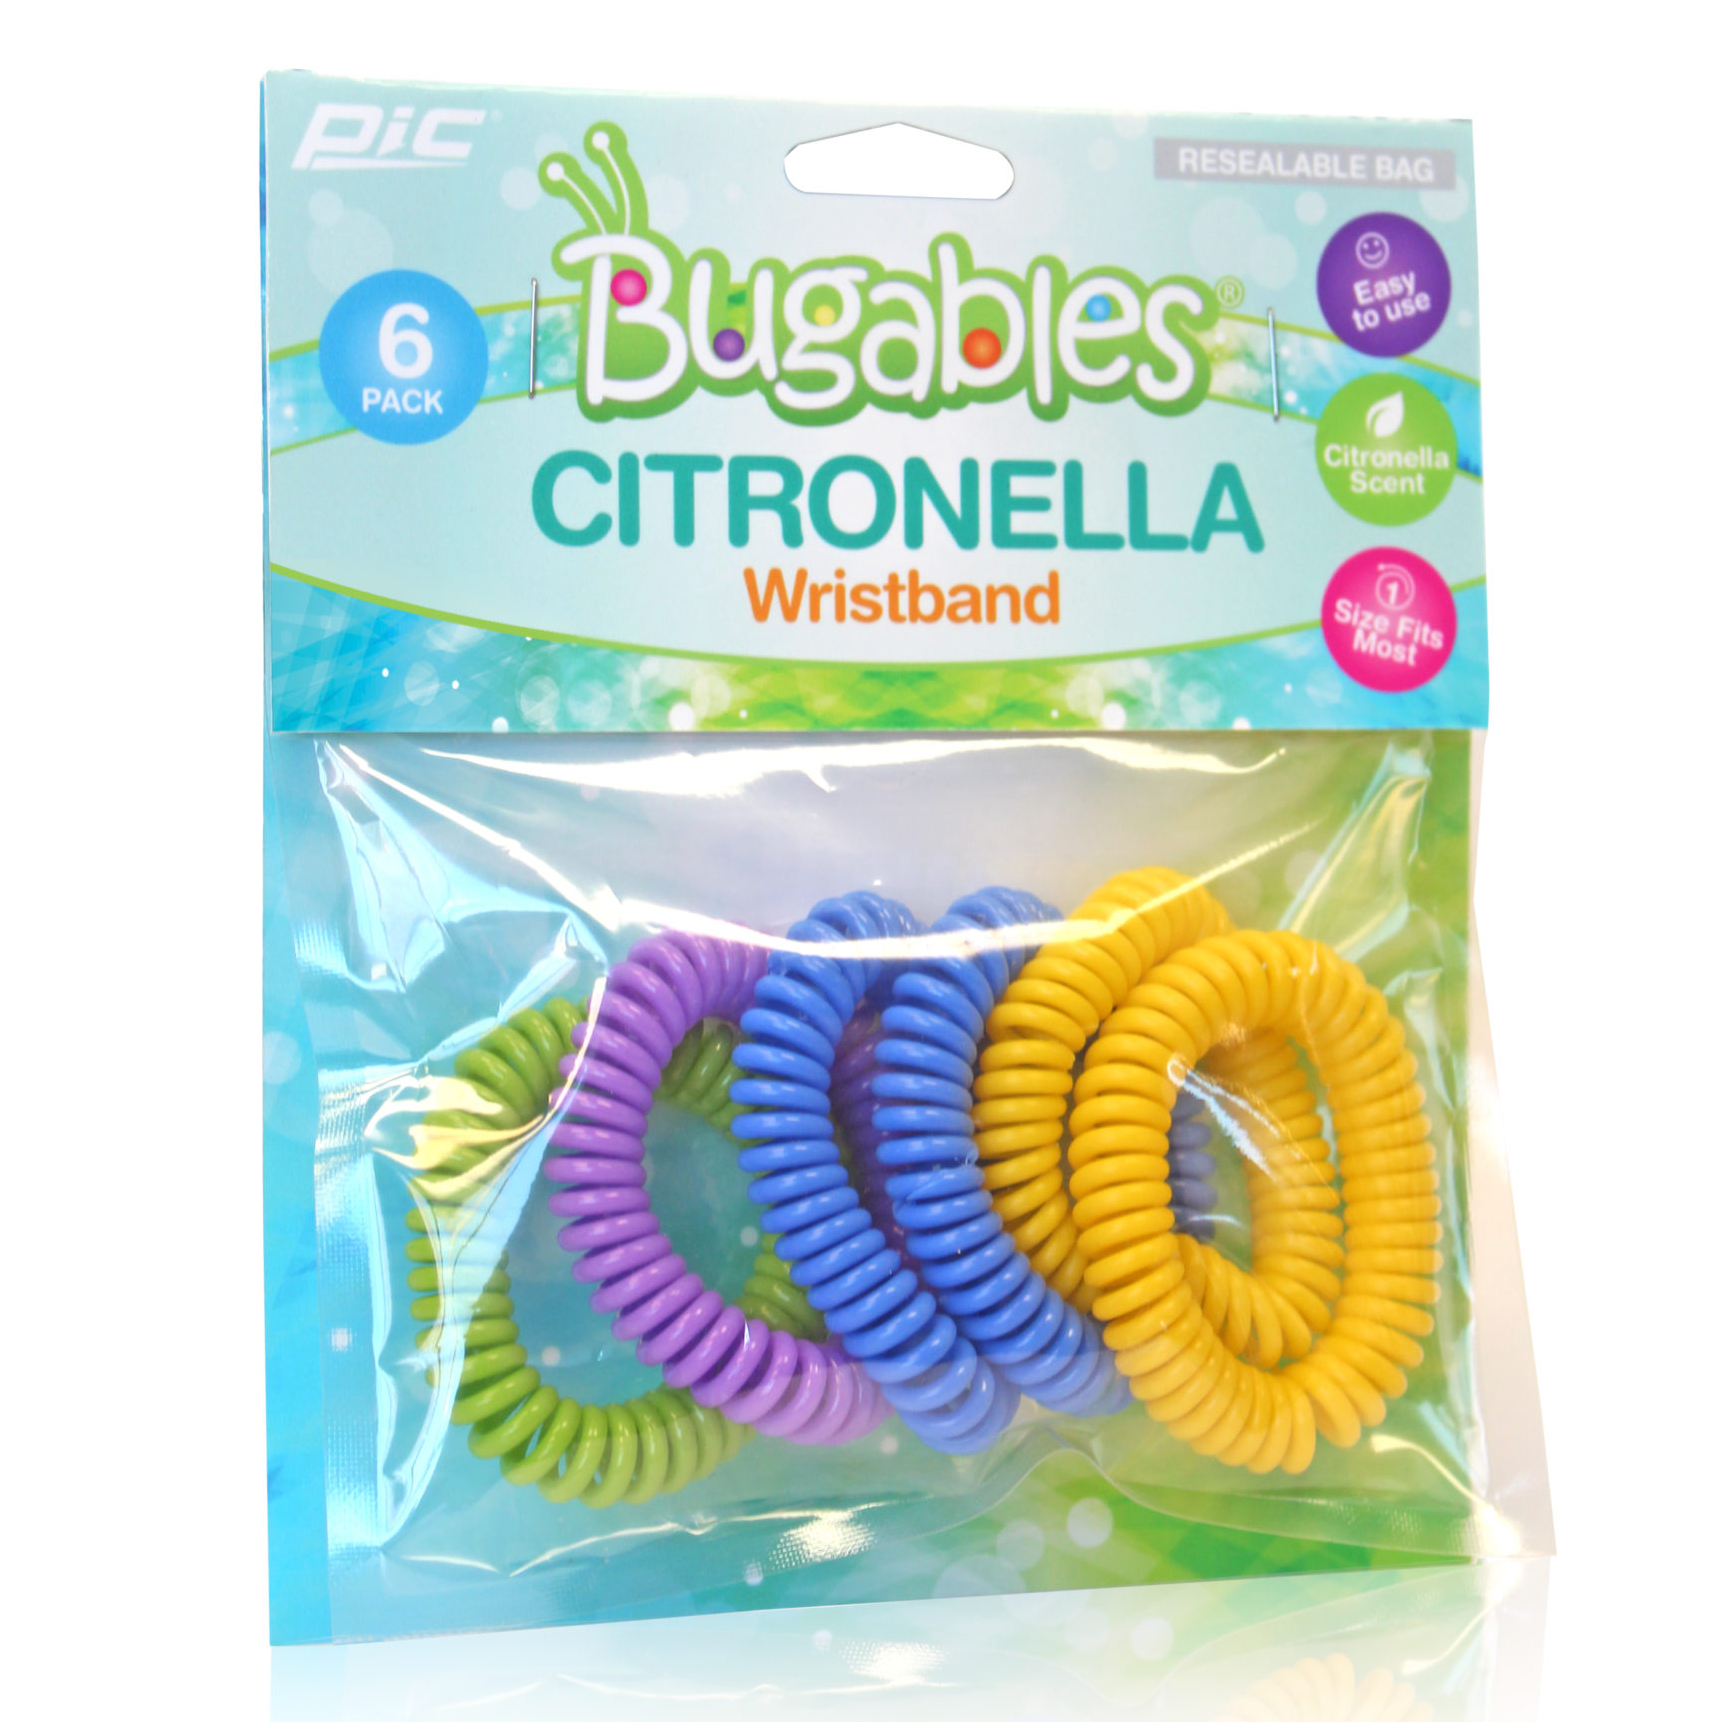 Bugables Citronella Coil Wristbands, One Size Fits All, Multicolor, 6 Pack